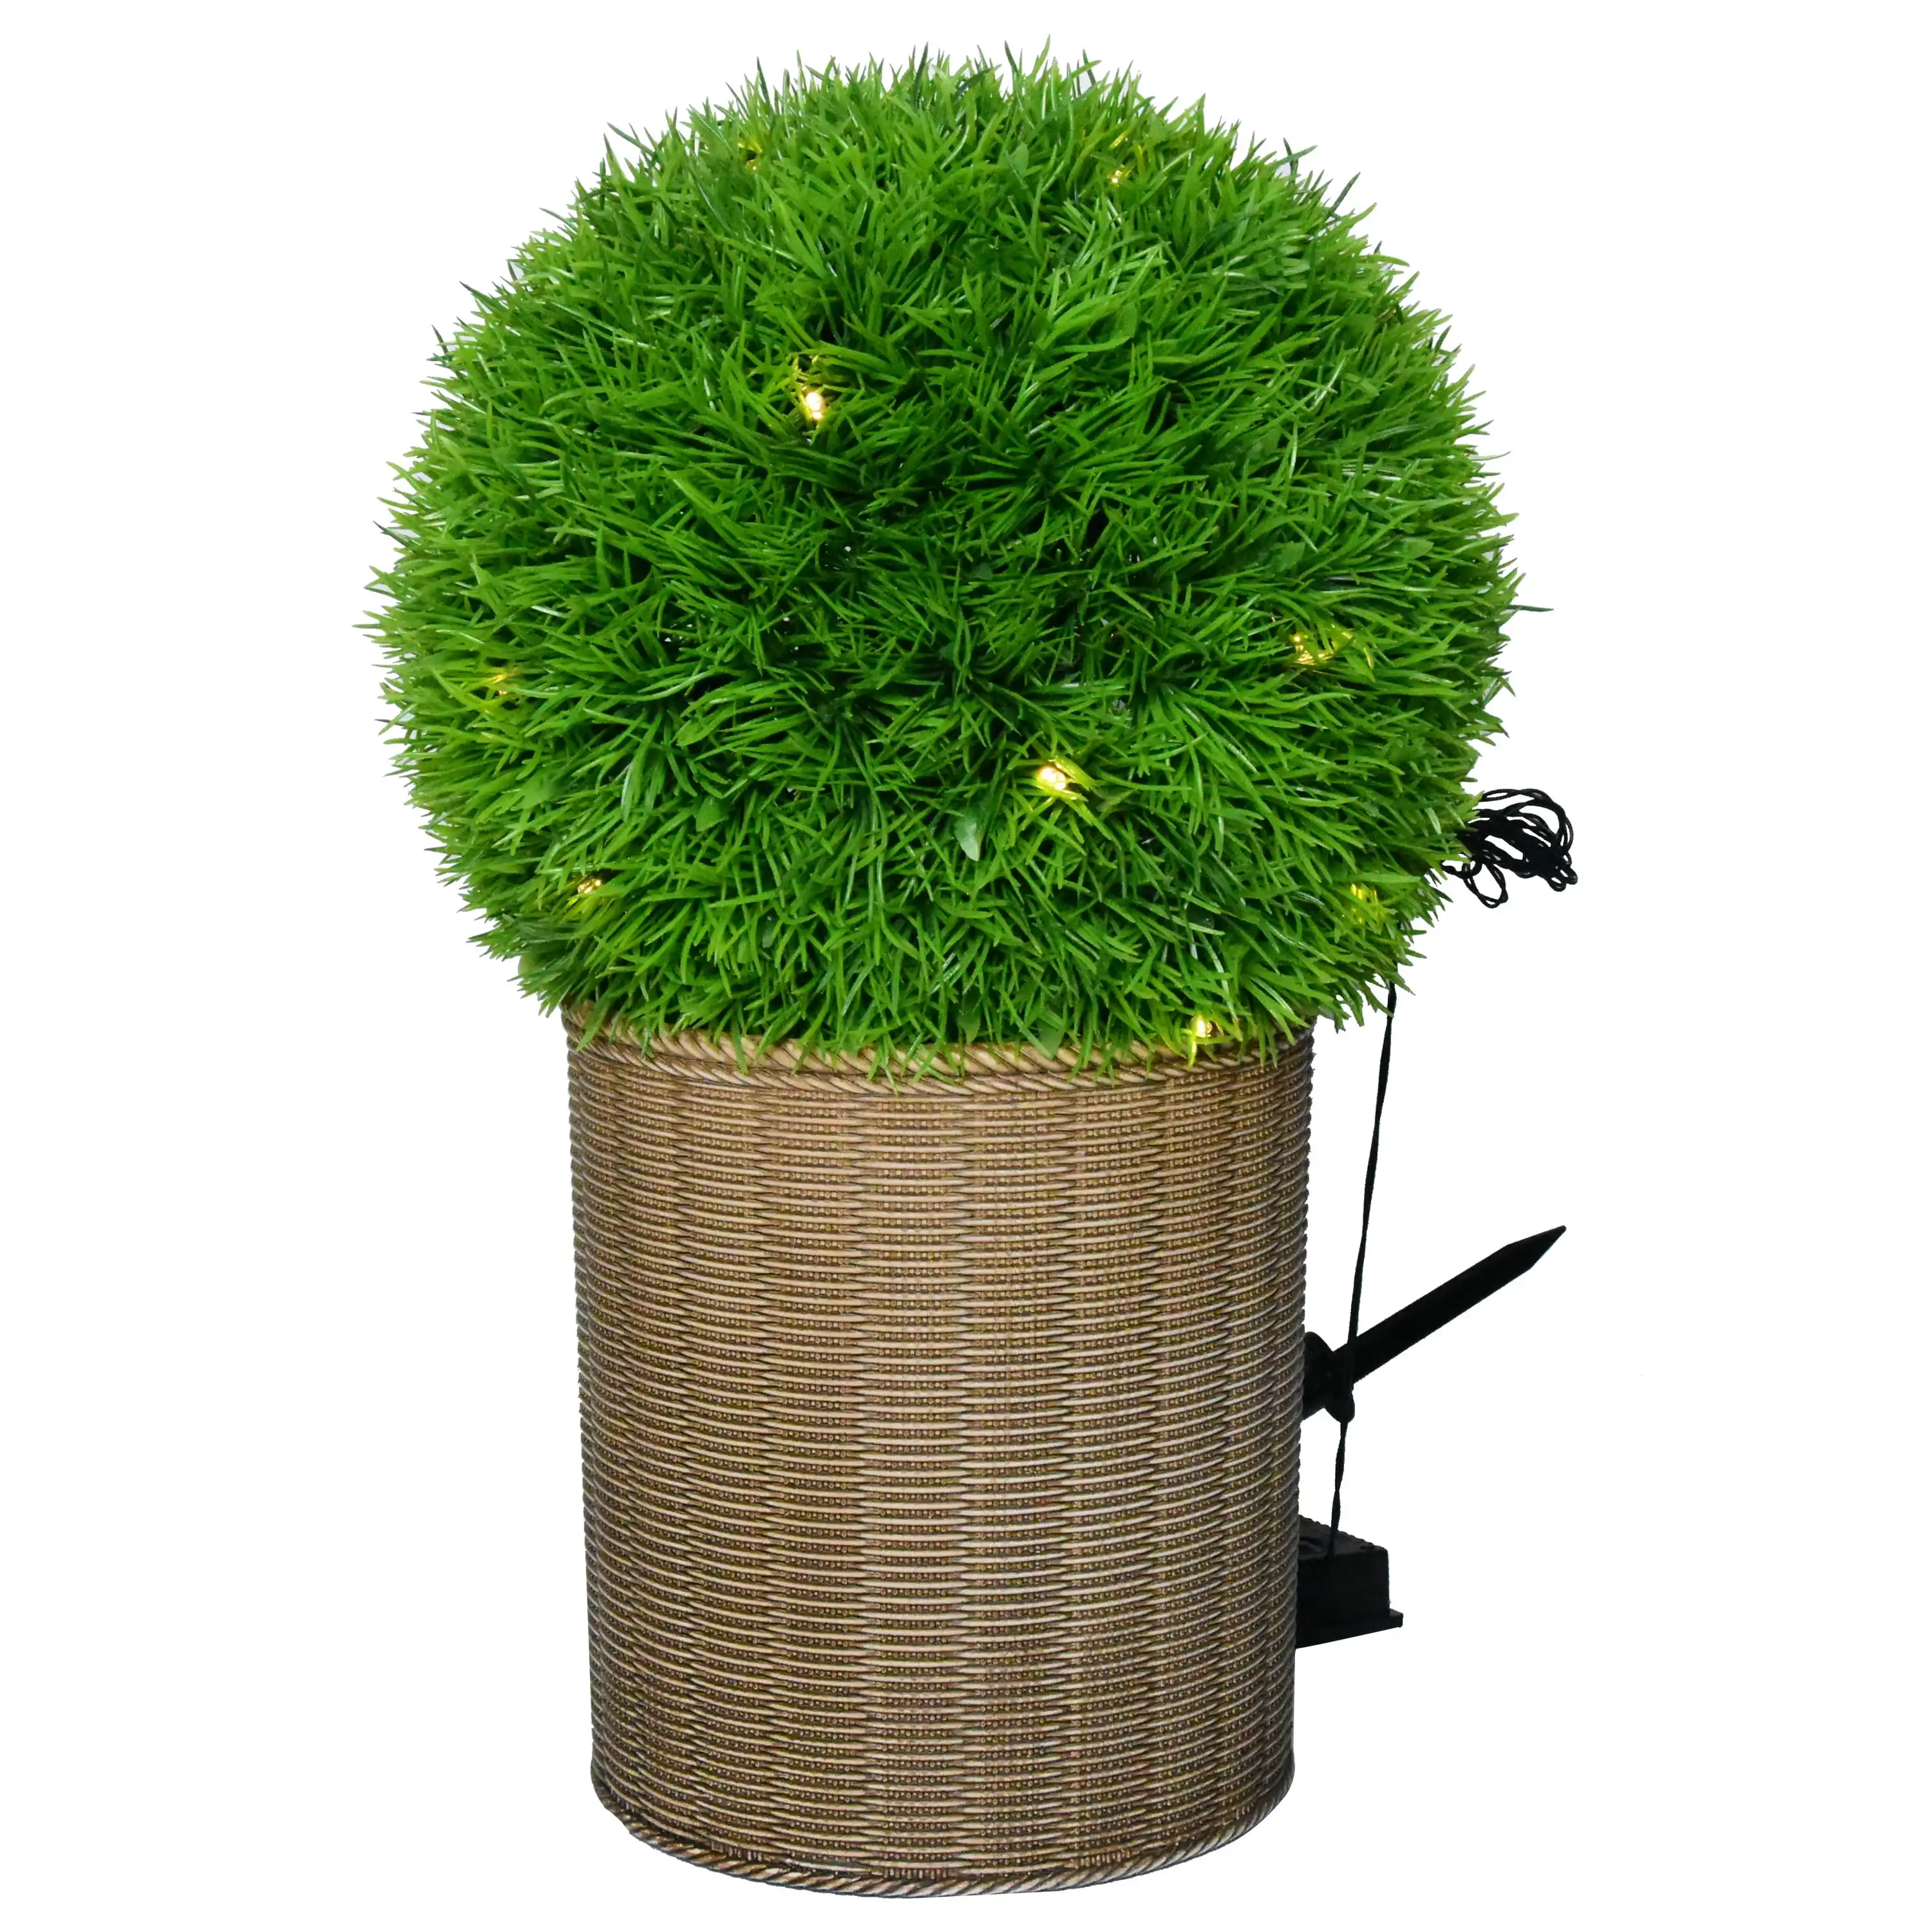 

Better Homes & Gardens 18"H Topiary Outdoor Round Decor with Solar Powered Warm White LED Lights Pine Needle